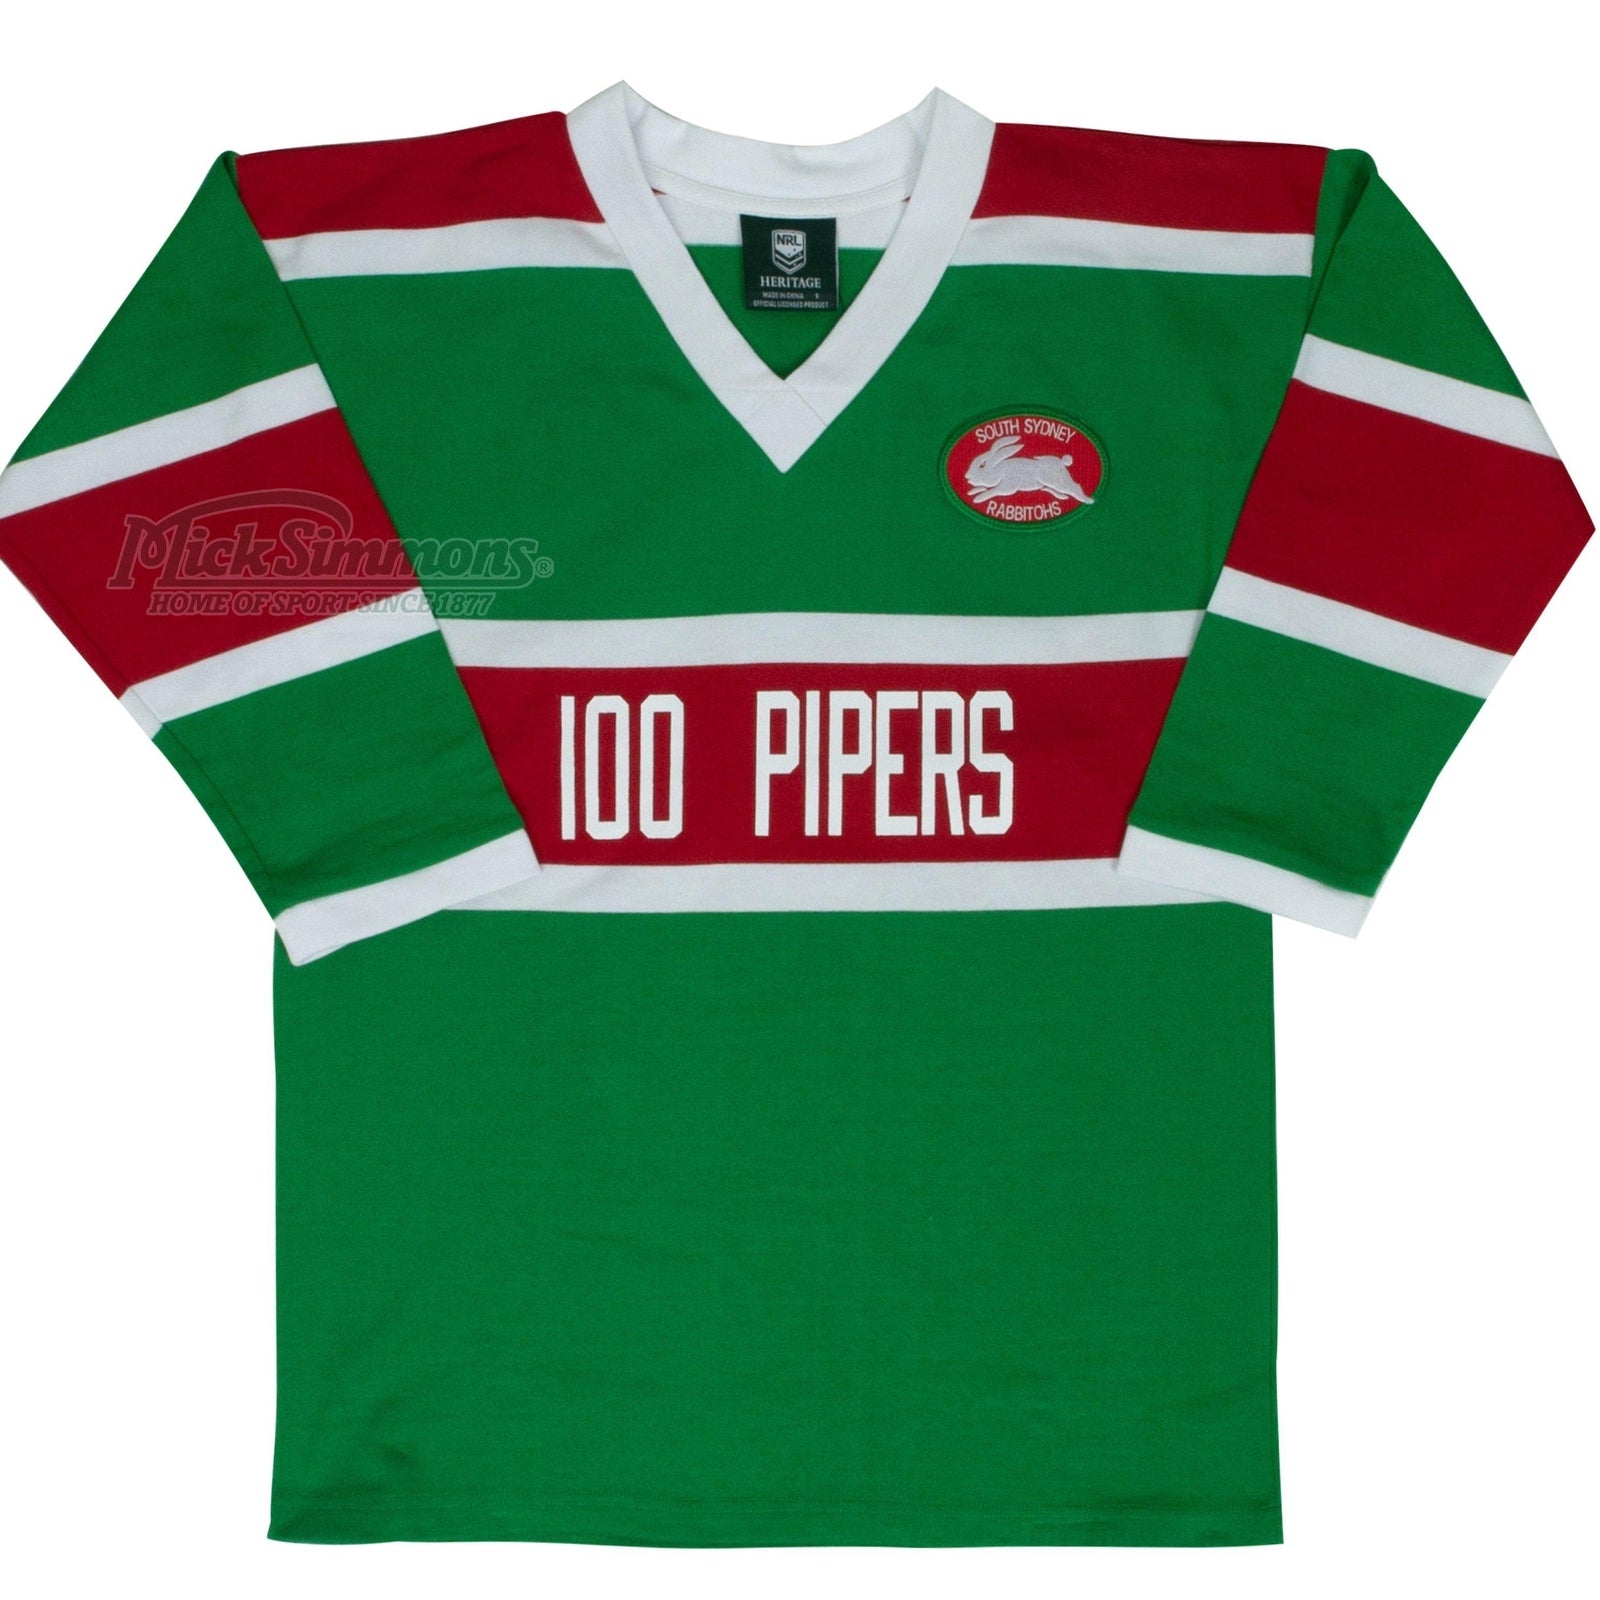 Details about   South Sydney Rabbitohs ARL NRL Classic Retro 100 Pipers T Shirt Mint Sizes S-5XL 